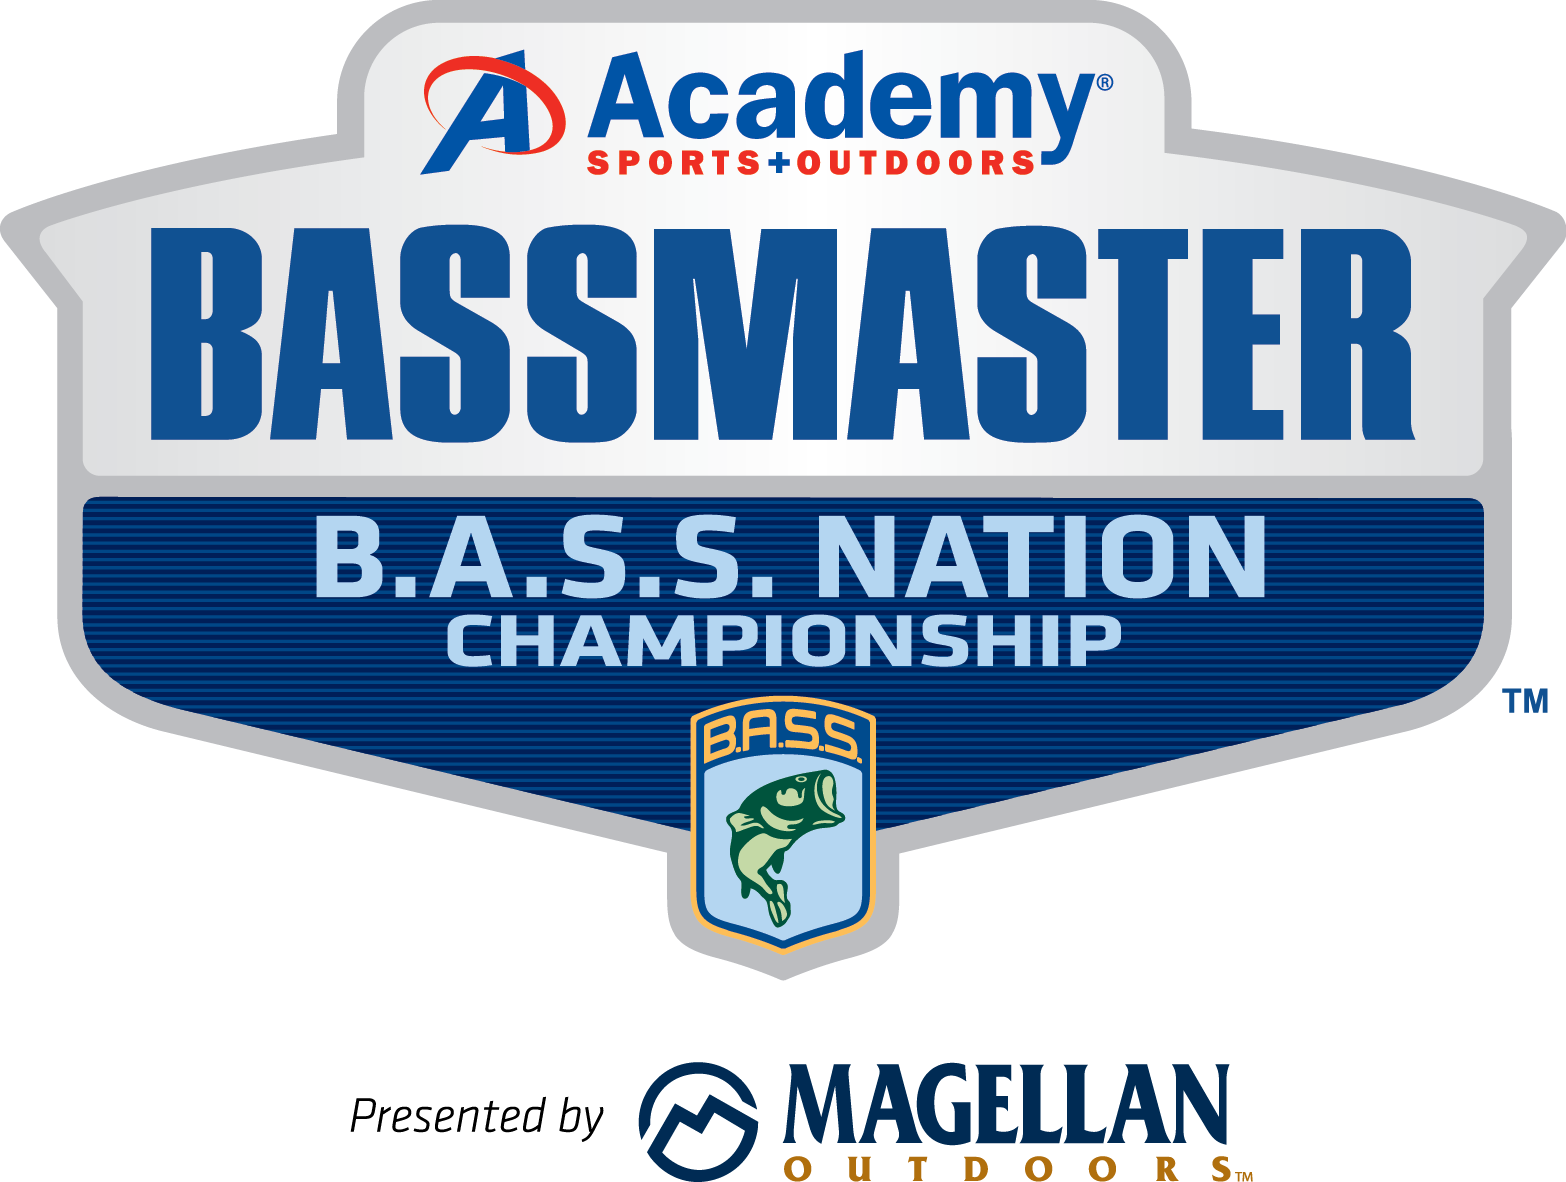 The 2017 Academy Sports + Outdoors B.A.S.S. Nation Championship presented by Magellan Outdoors features 120 competitors from all over the world. Get to know them as they compete for the Championship. 